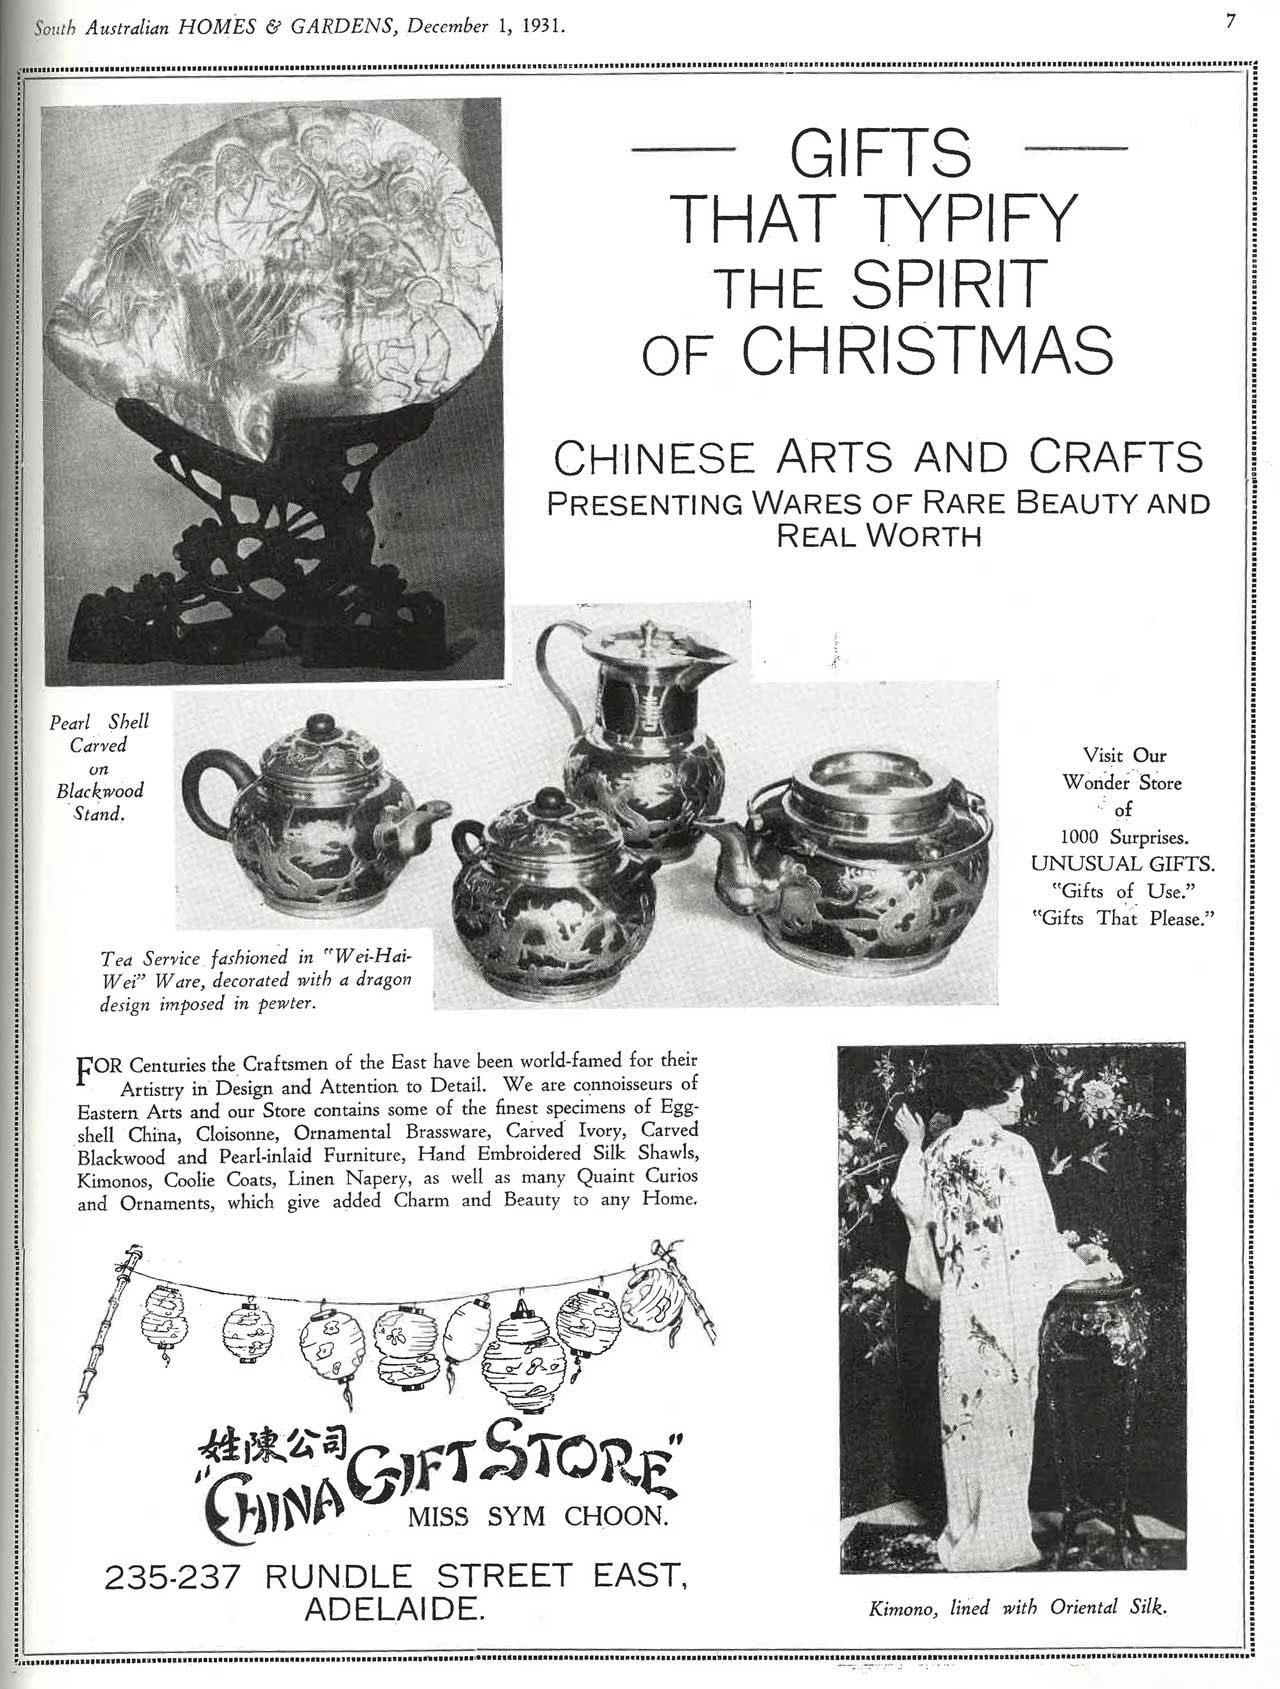 'Gifts that typify the spirit of Christmas', Australian Home and Garden, 1 December 1913, page 7.